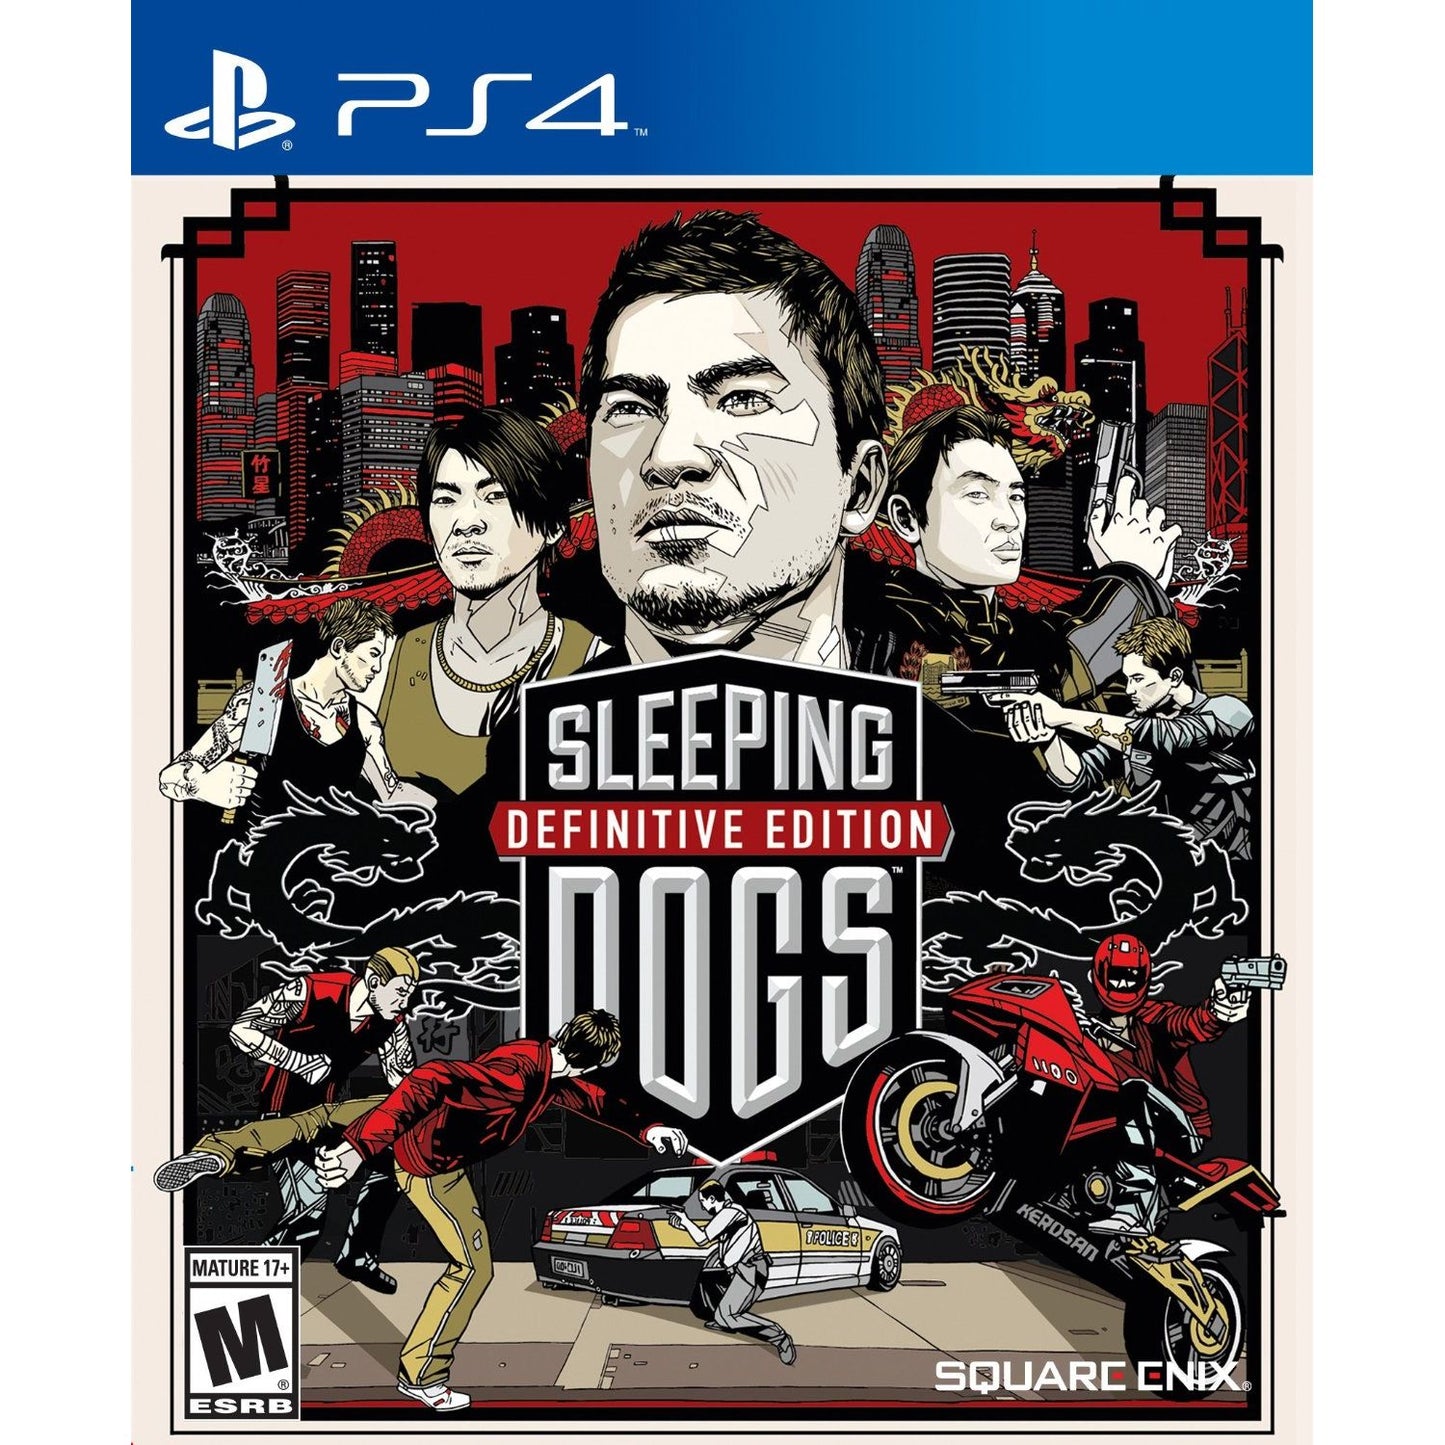 SLEEPING DOGS - DEFINITIVE EDITION (used)